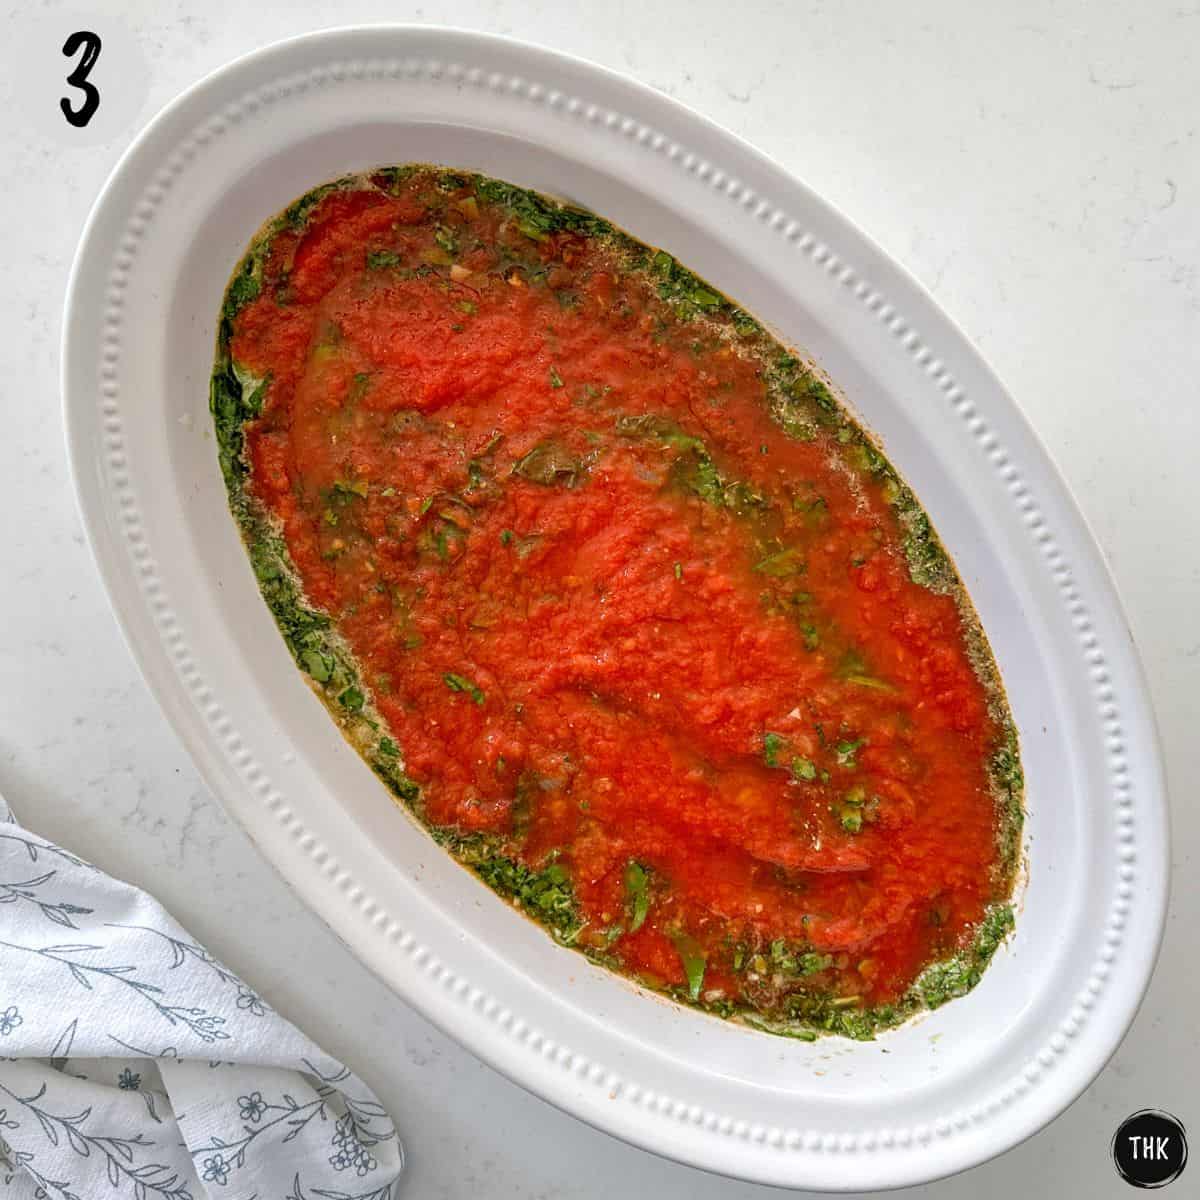 Casserole dish with broth, tomato sauce, and spinach inside.